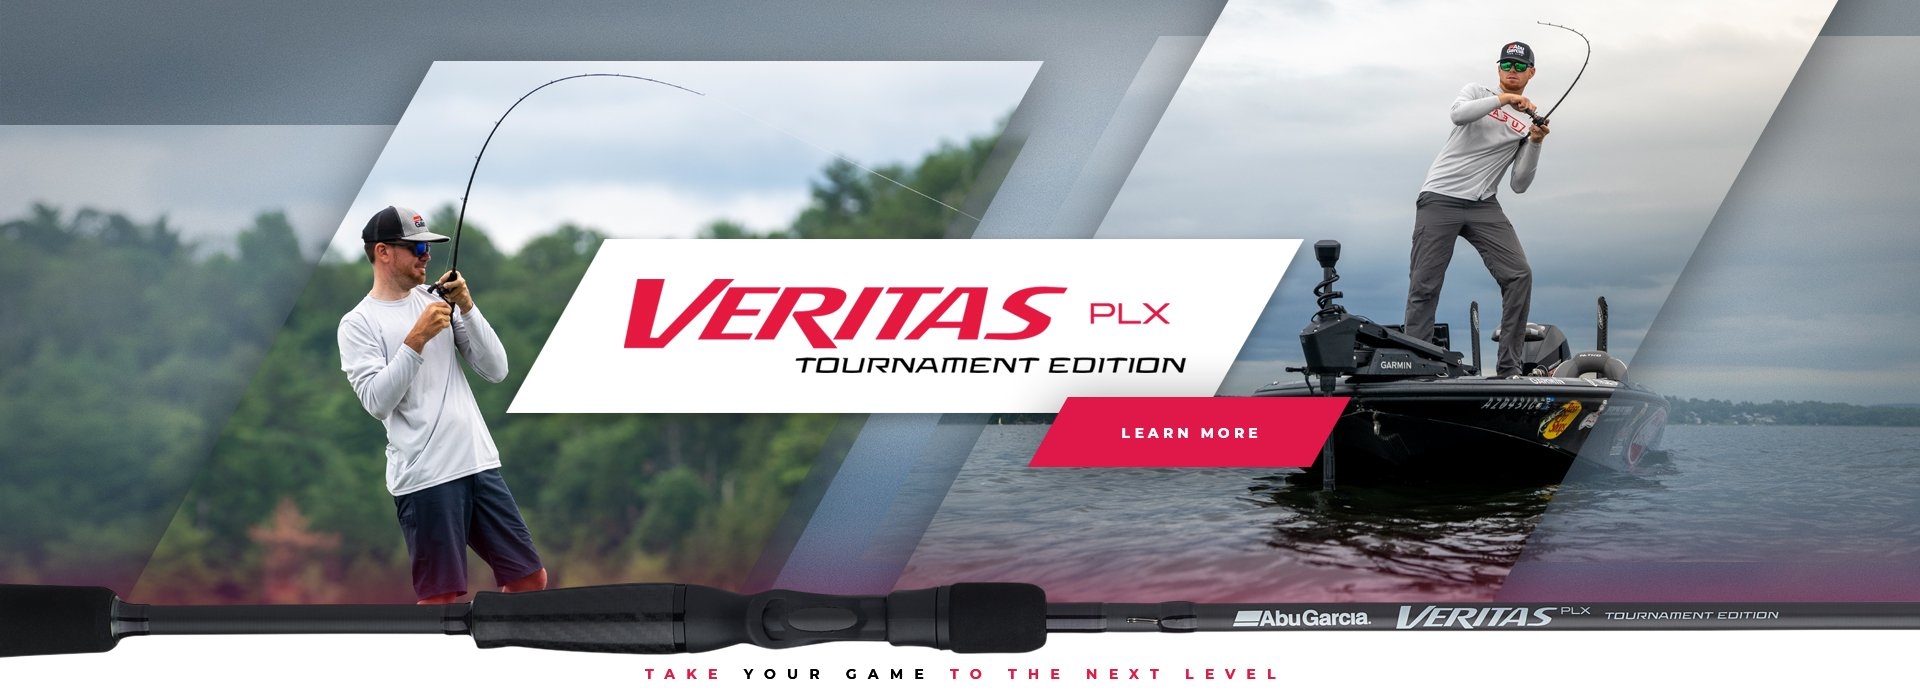 Learn about the Veritas PLX Tournament Edition